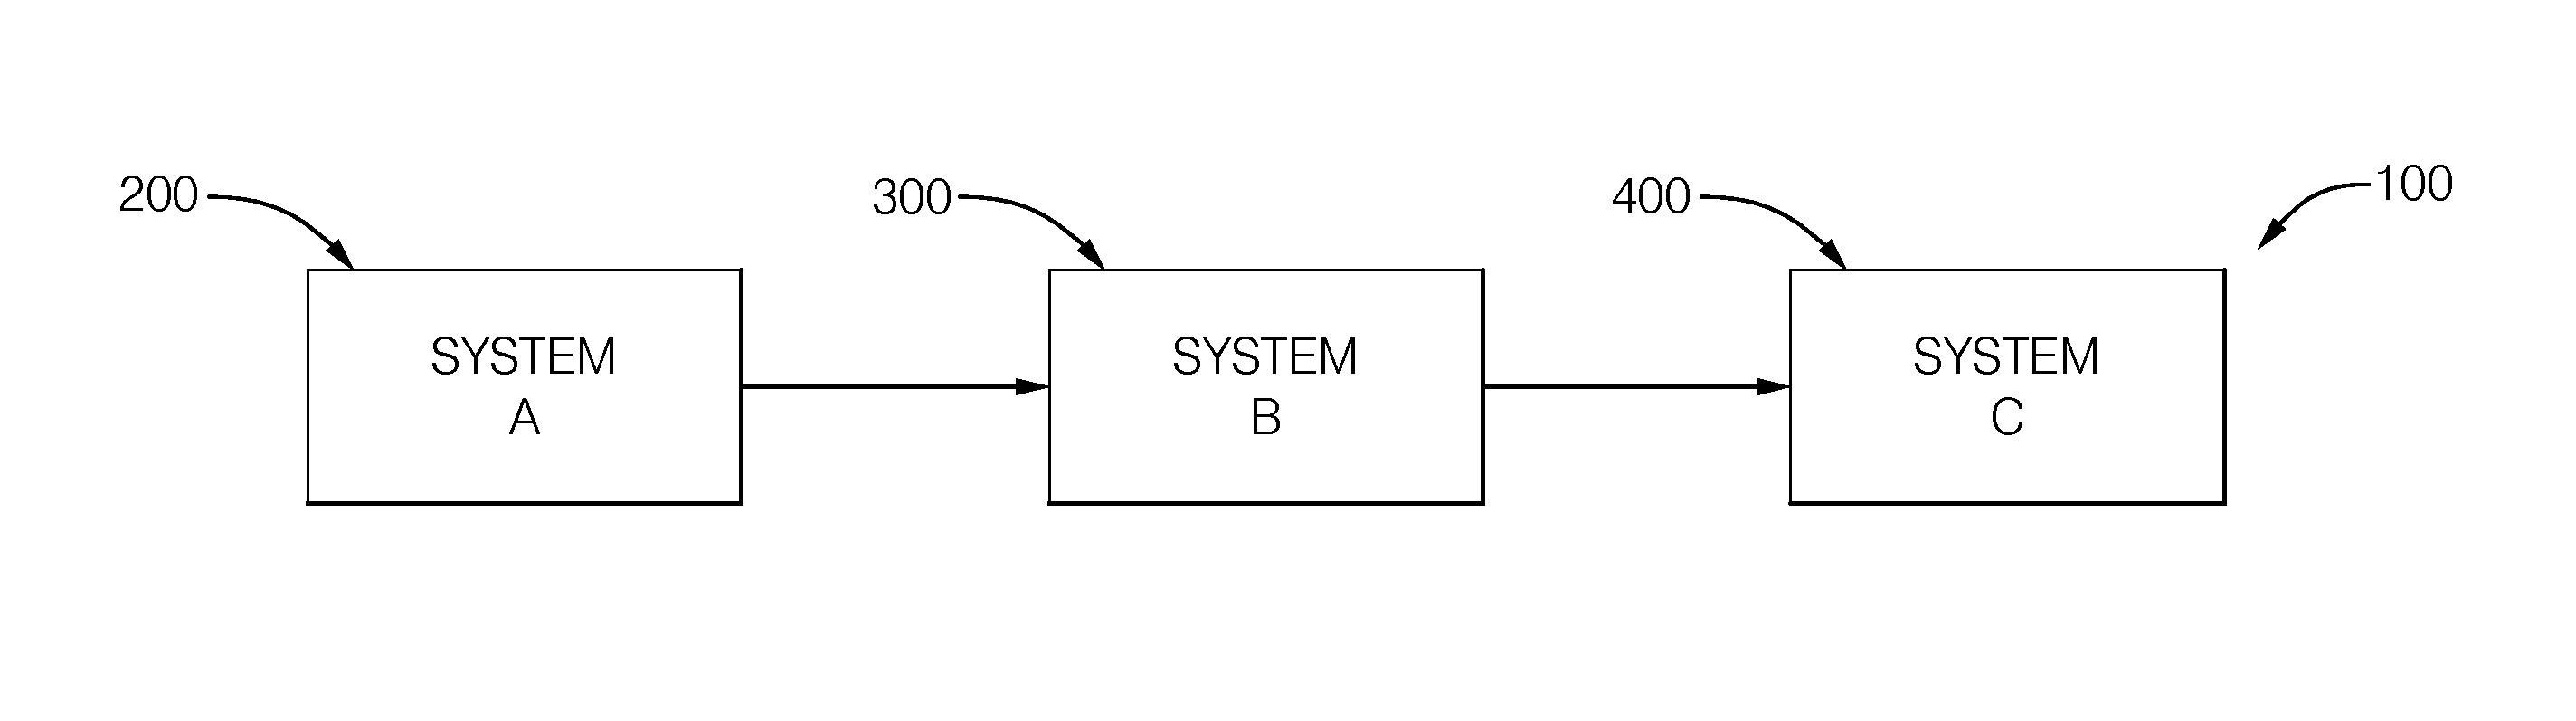 Anode protection system for shutdown of solid oxide fuel cell system